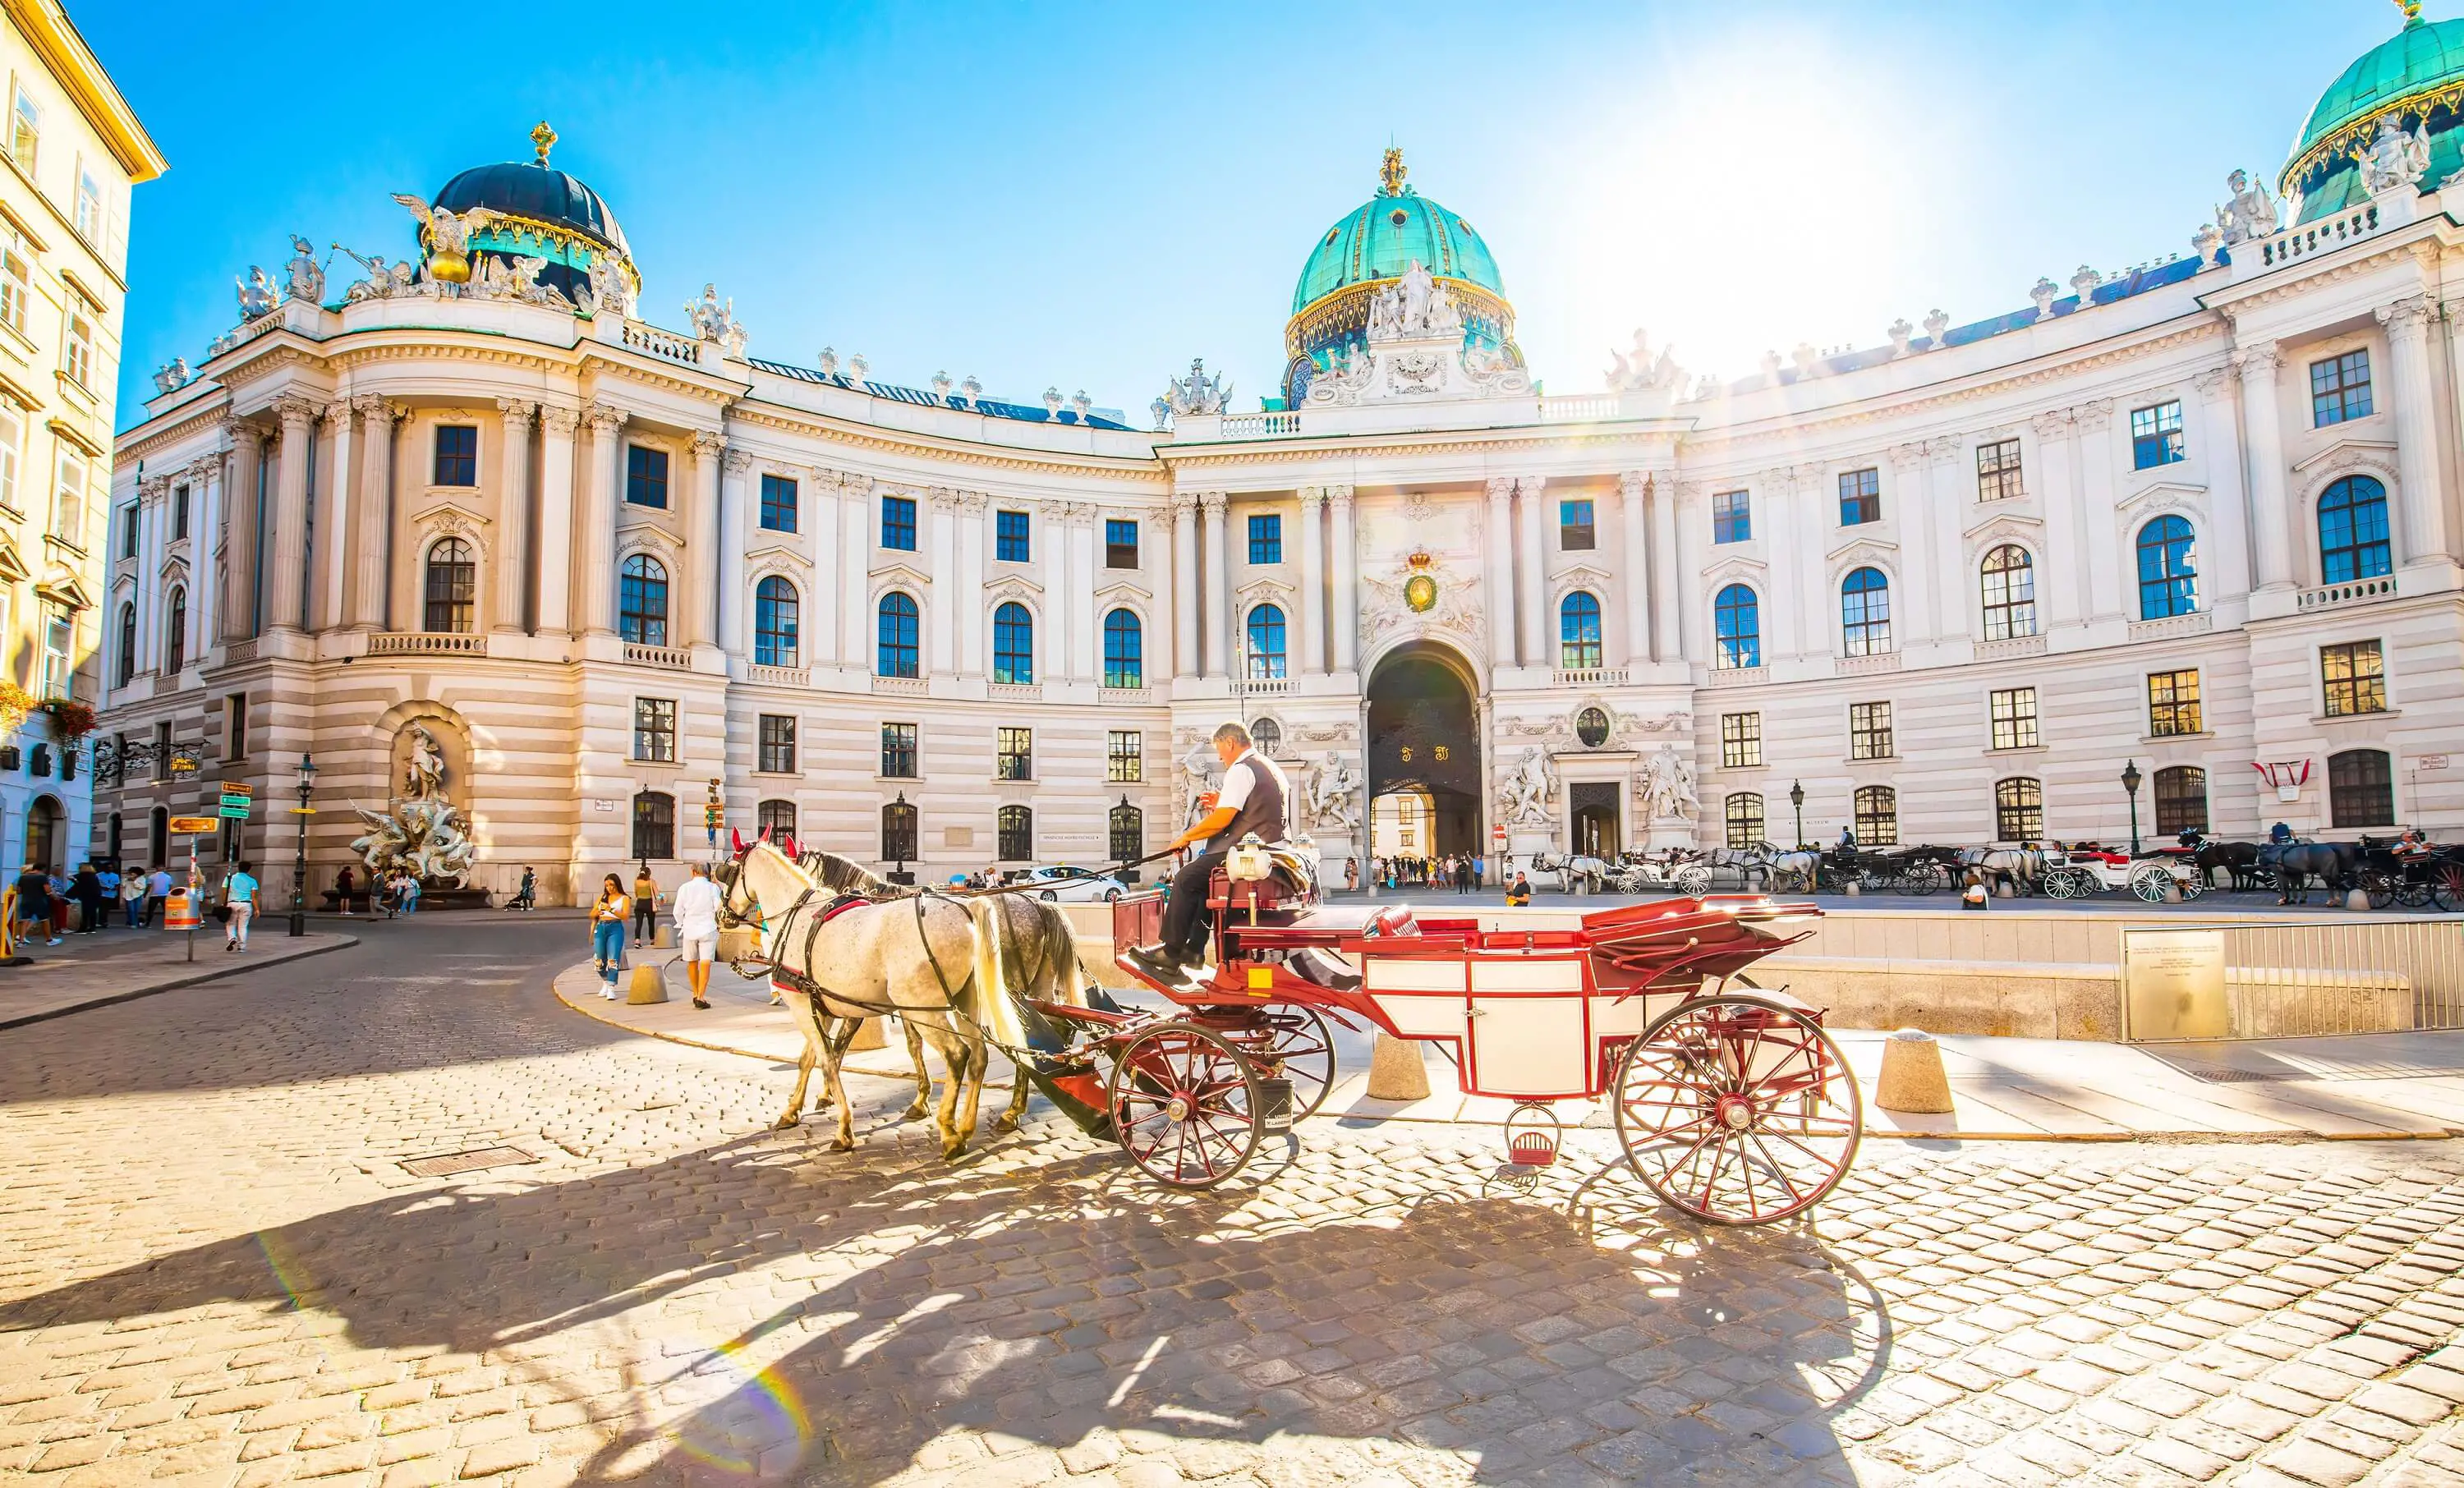 Vienna - Hofburg Palace and horse carriage